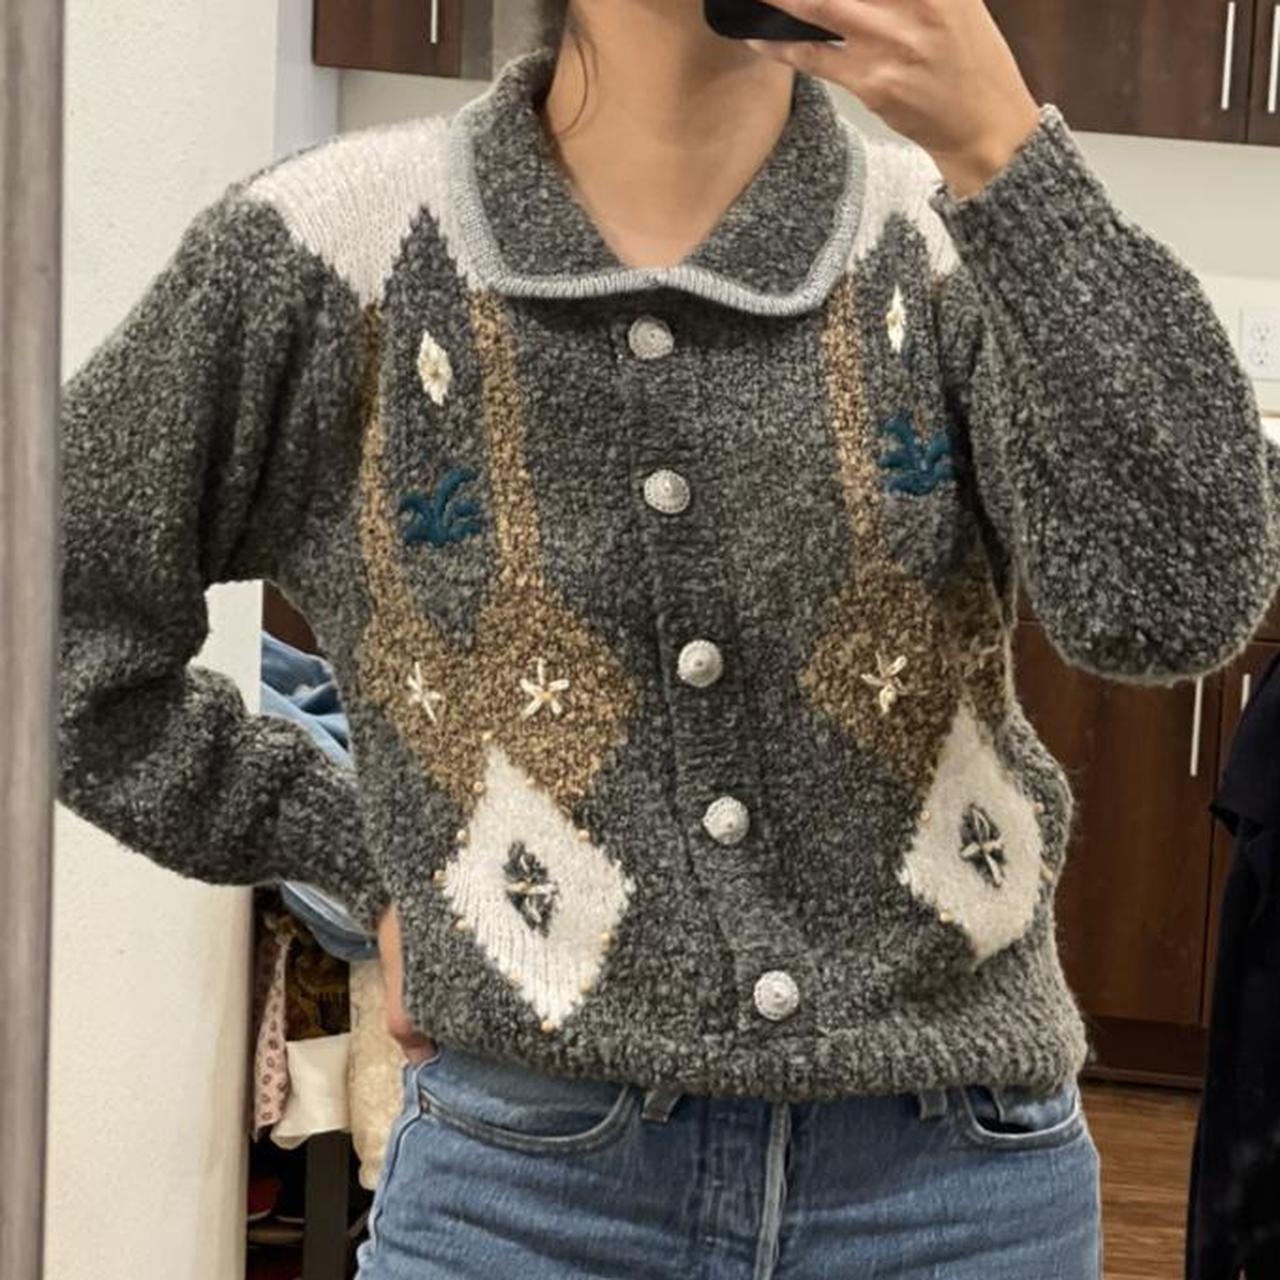 Product Image 4 - Vintage cardigan ❄️

Embroiders details 
no